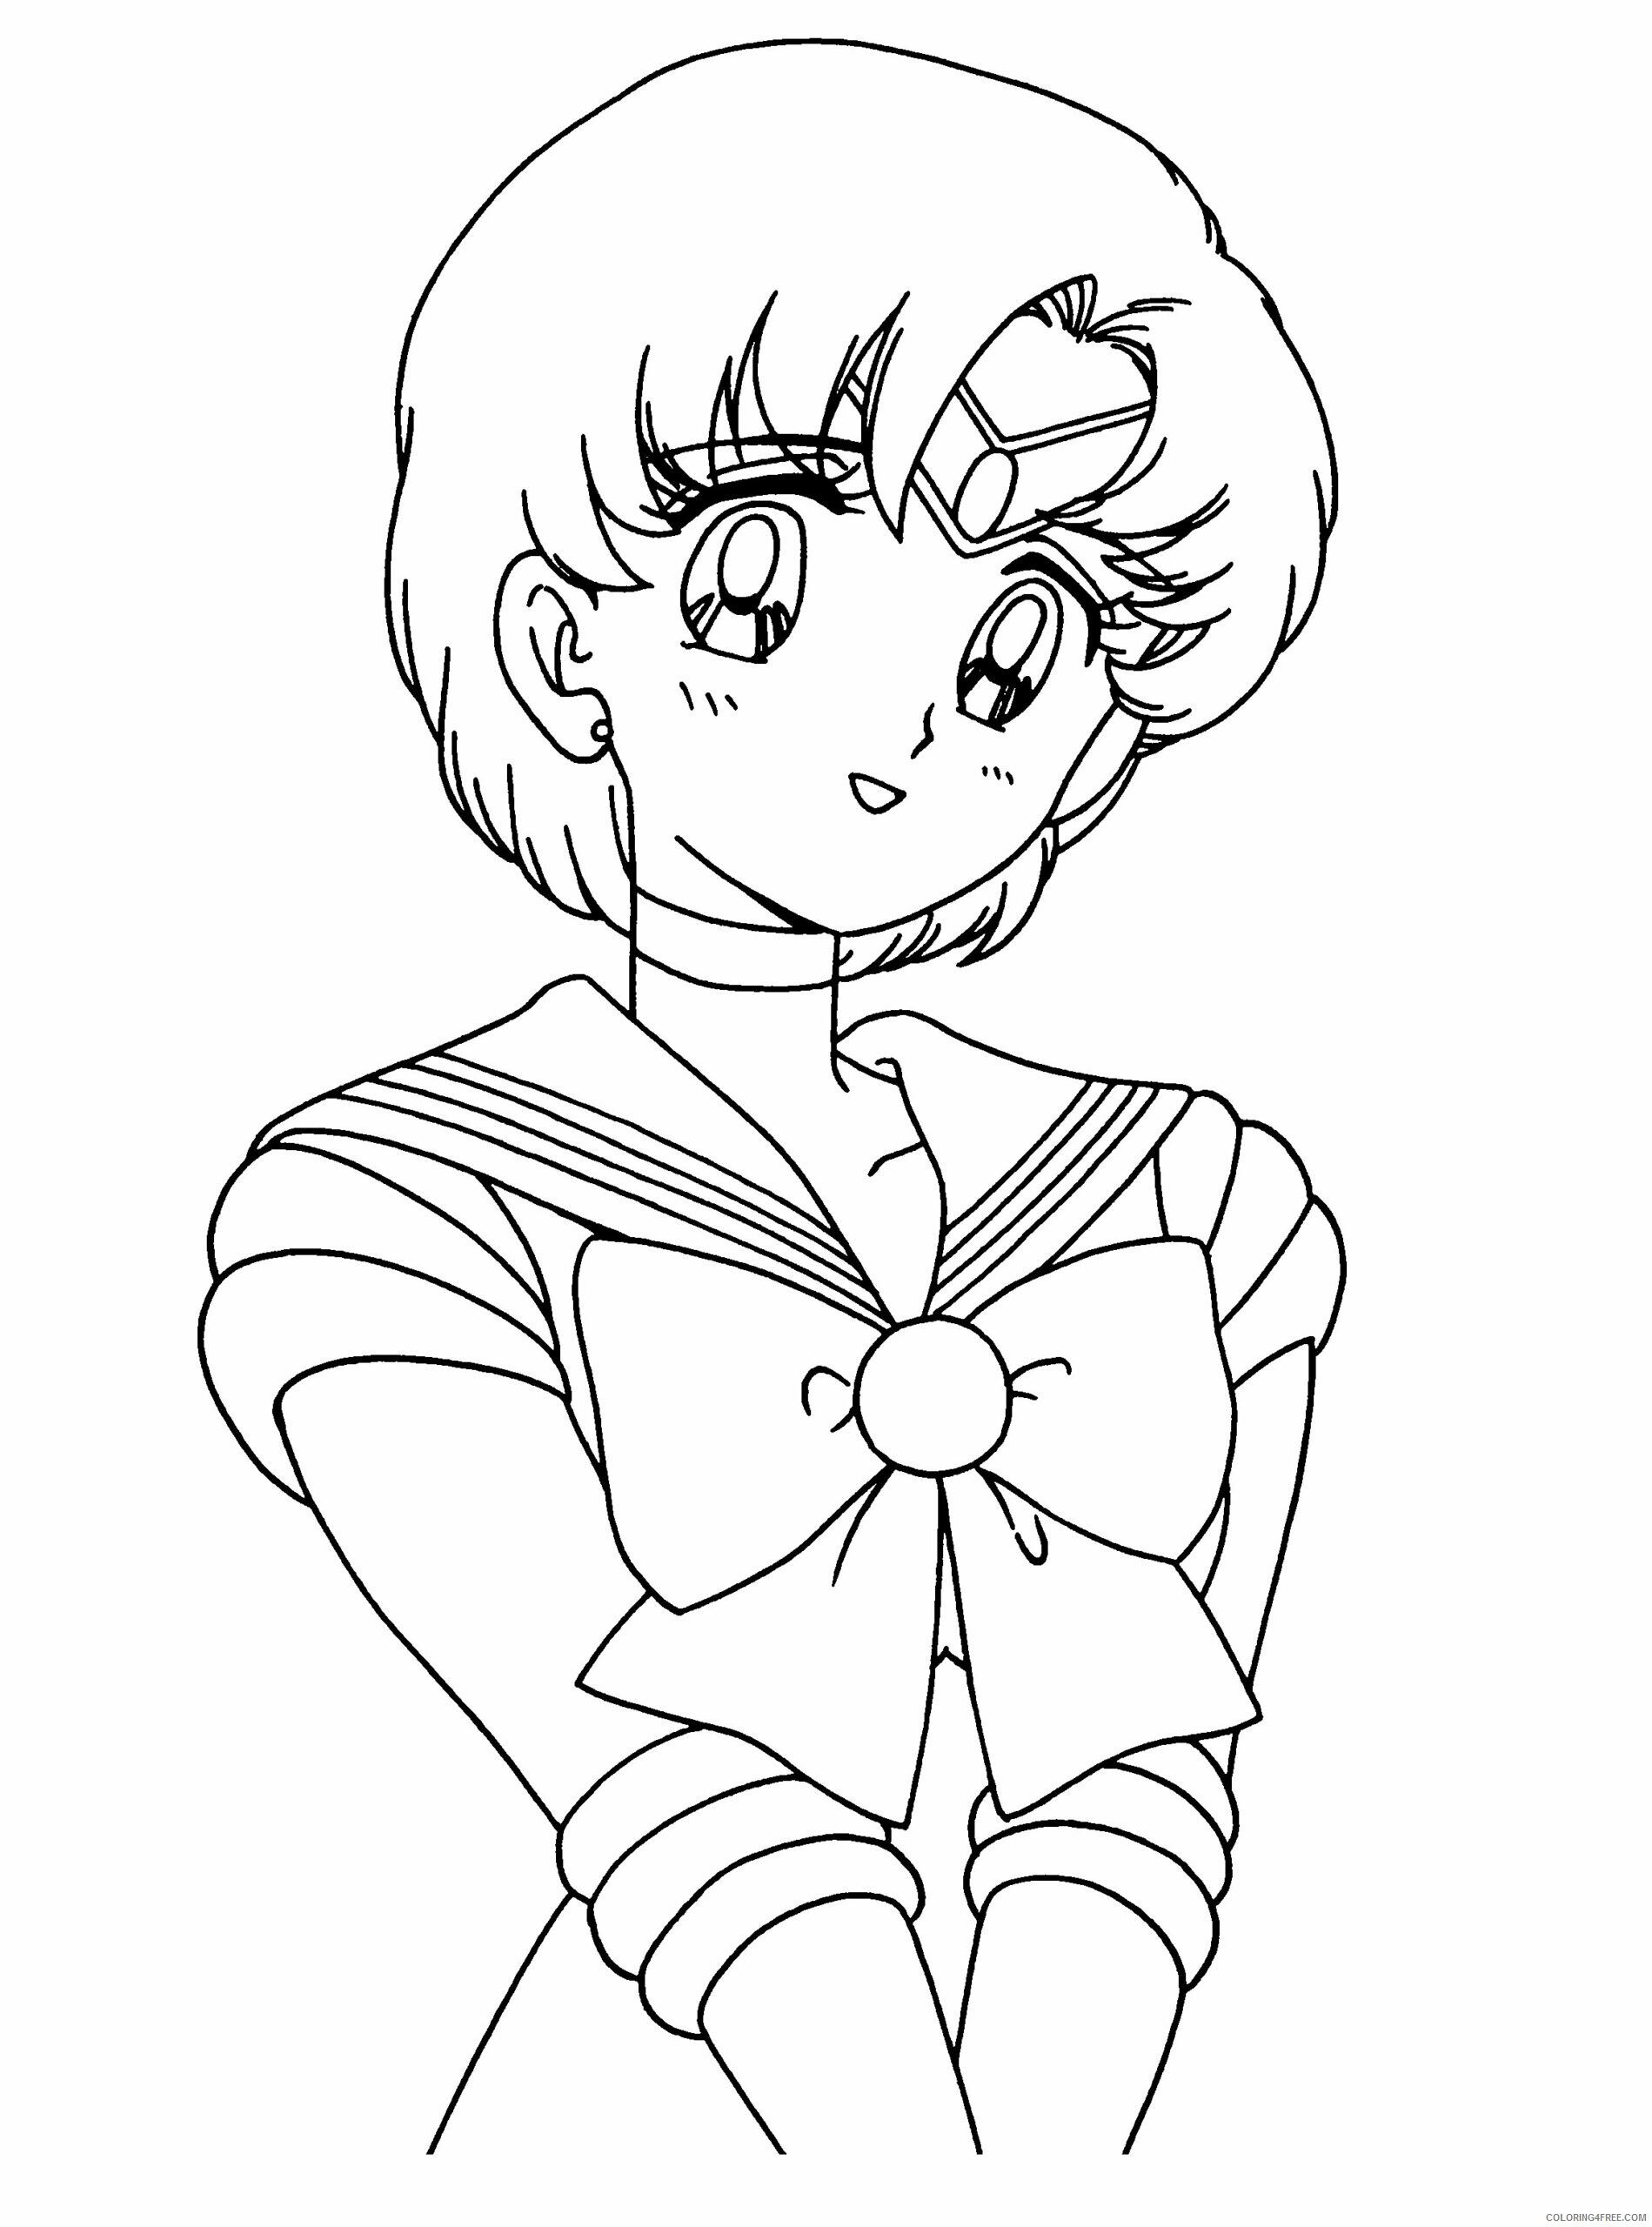 Sailor Moon Printable Coloring Pages Anime sailormoon xUrTl 2021 1000 Coloring4free